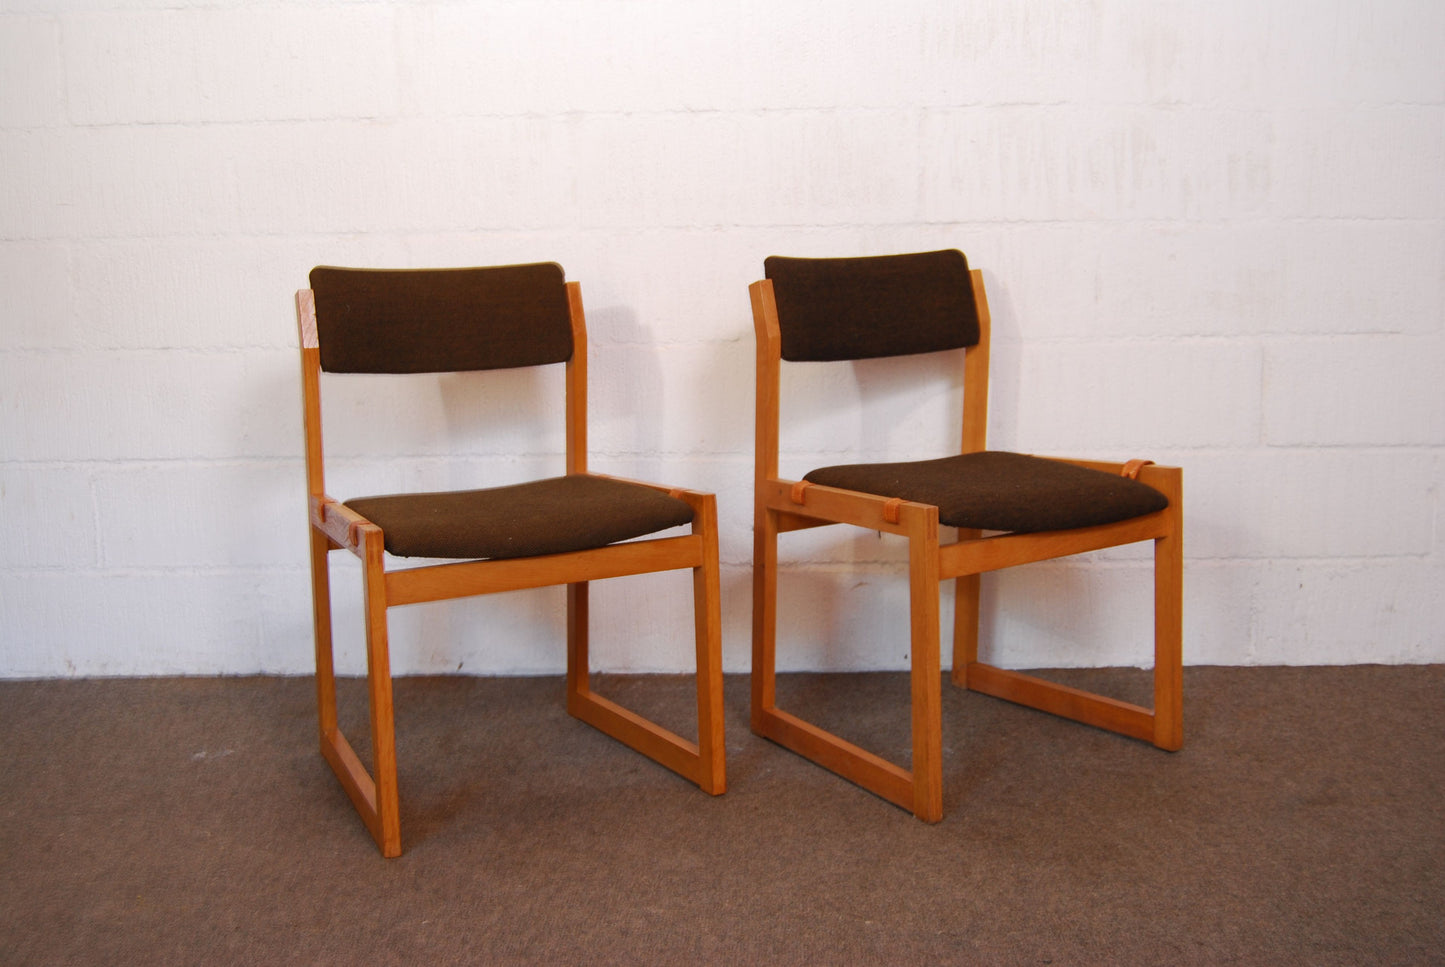 Pair of oak dining chairs by K.S. MÌübler